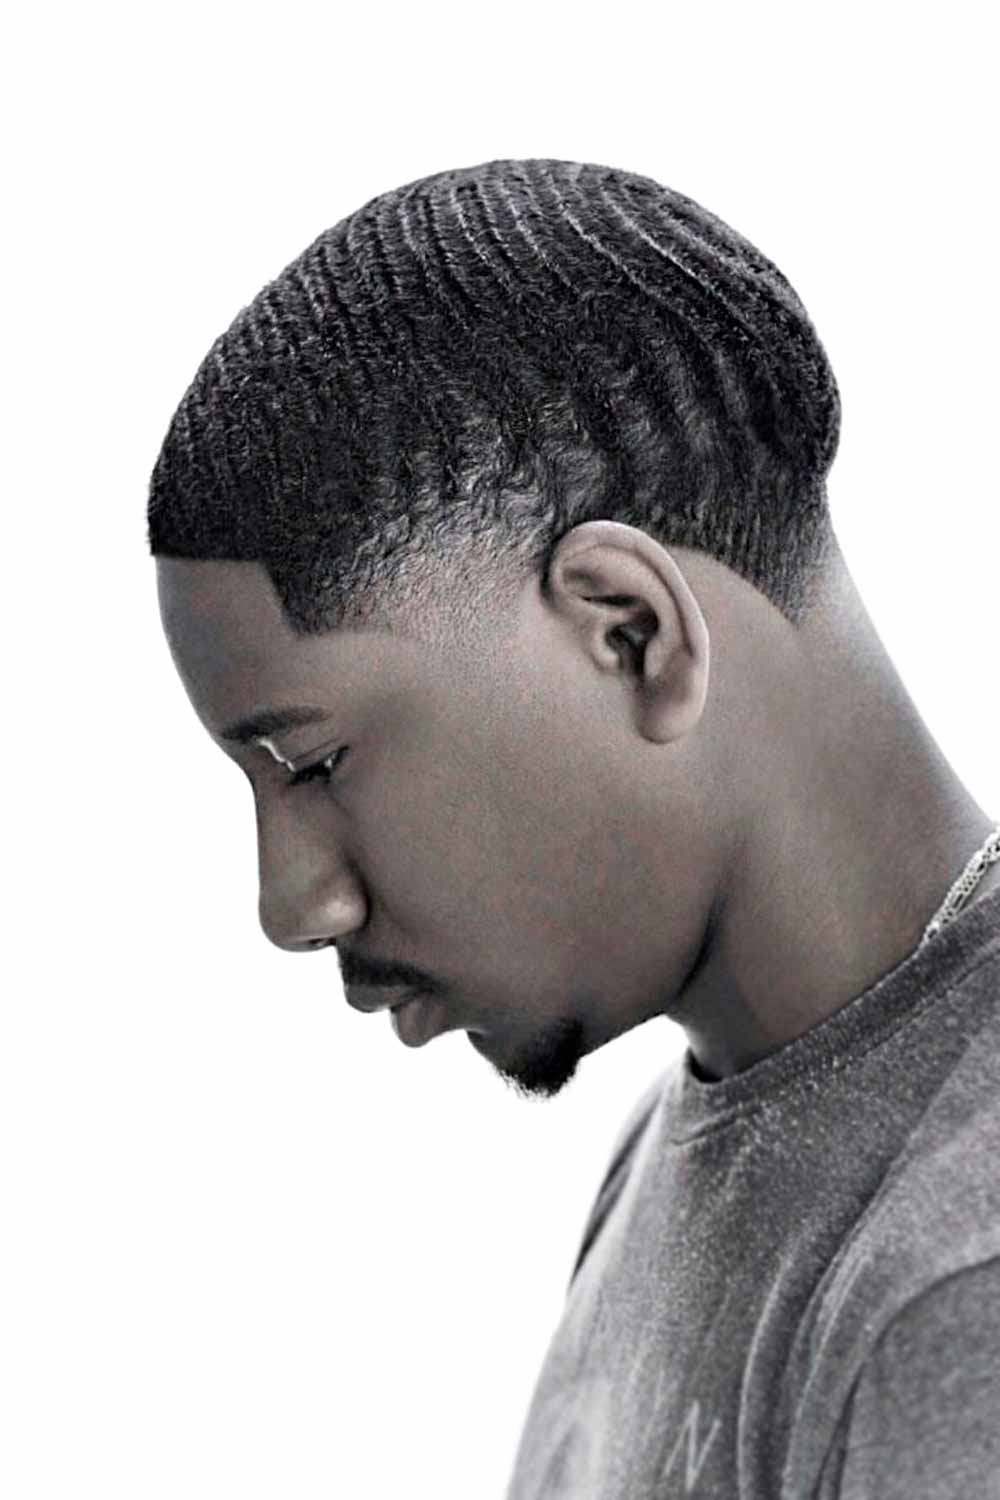 Low Taper Fade Hairstyles for Black Man #lowtaperfade #lowtaper #lowfade #taperfade #fade #taper